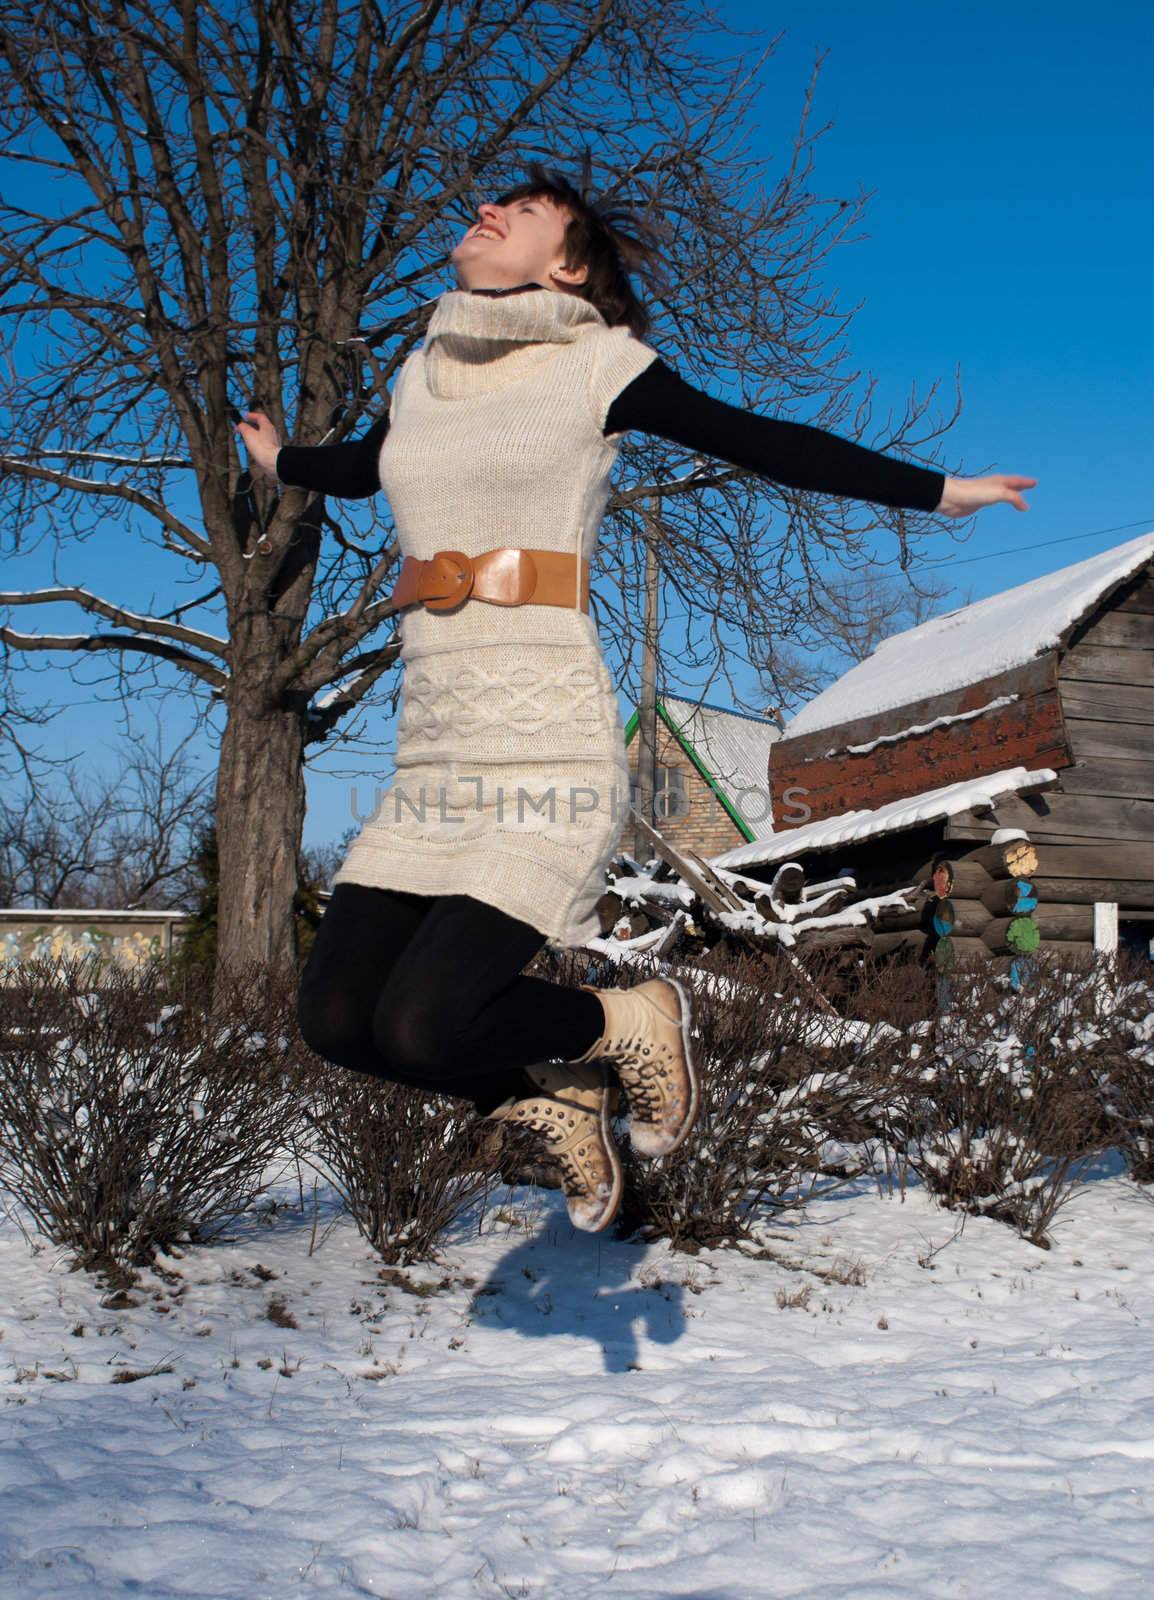 Young lady jumping at winter time